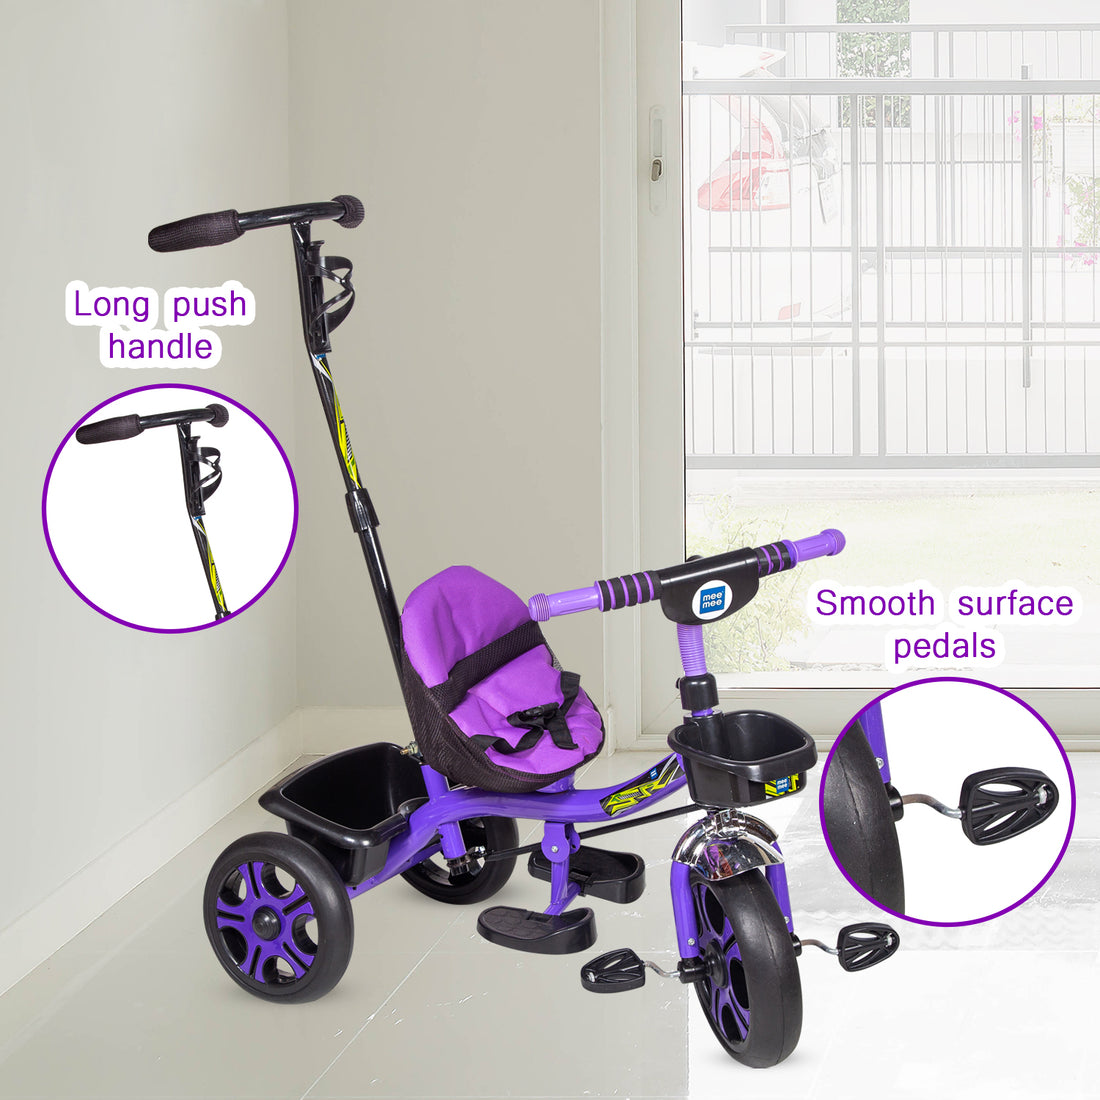 Mee Mee - Premium Baby Tricycle with Long Push Handle